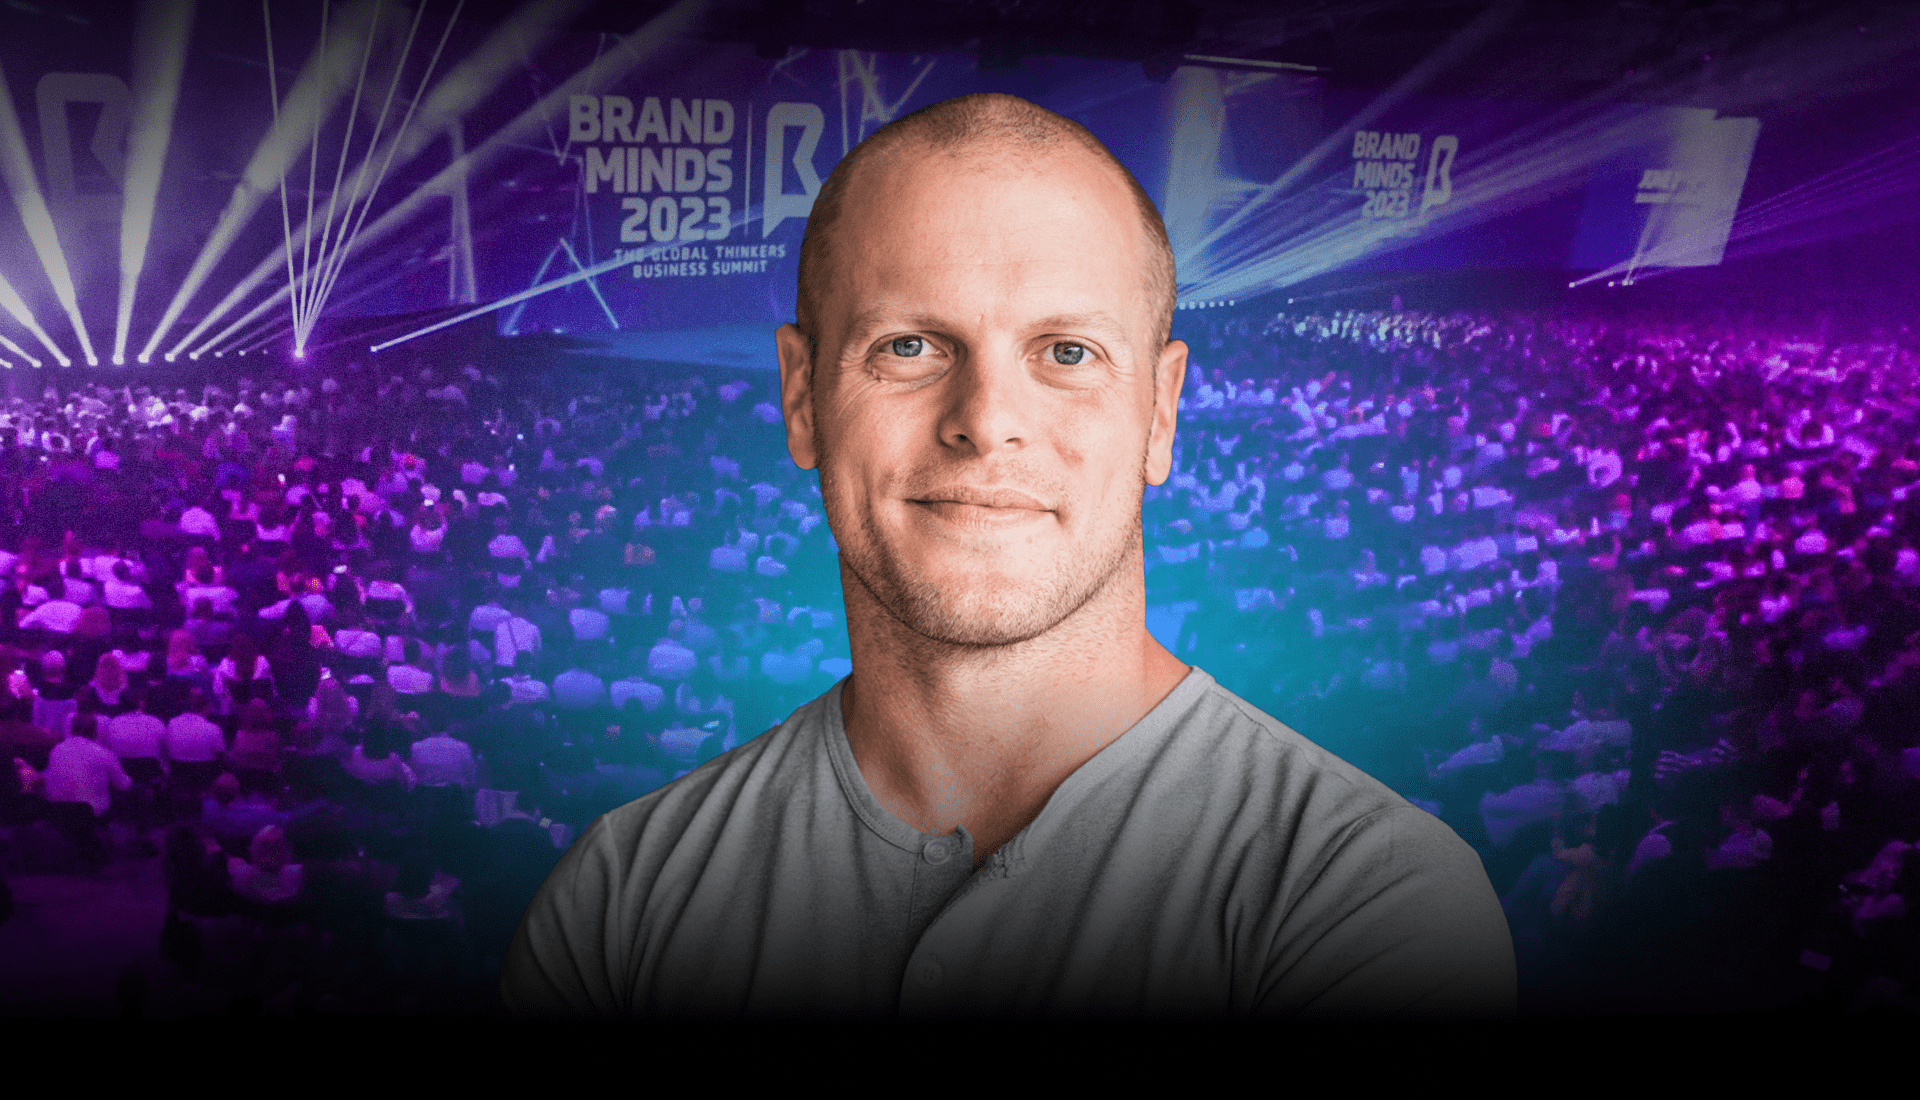 Tim Ferriss, host of the #1 business podcast has joined BRAND MINDS